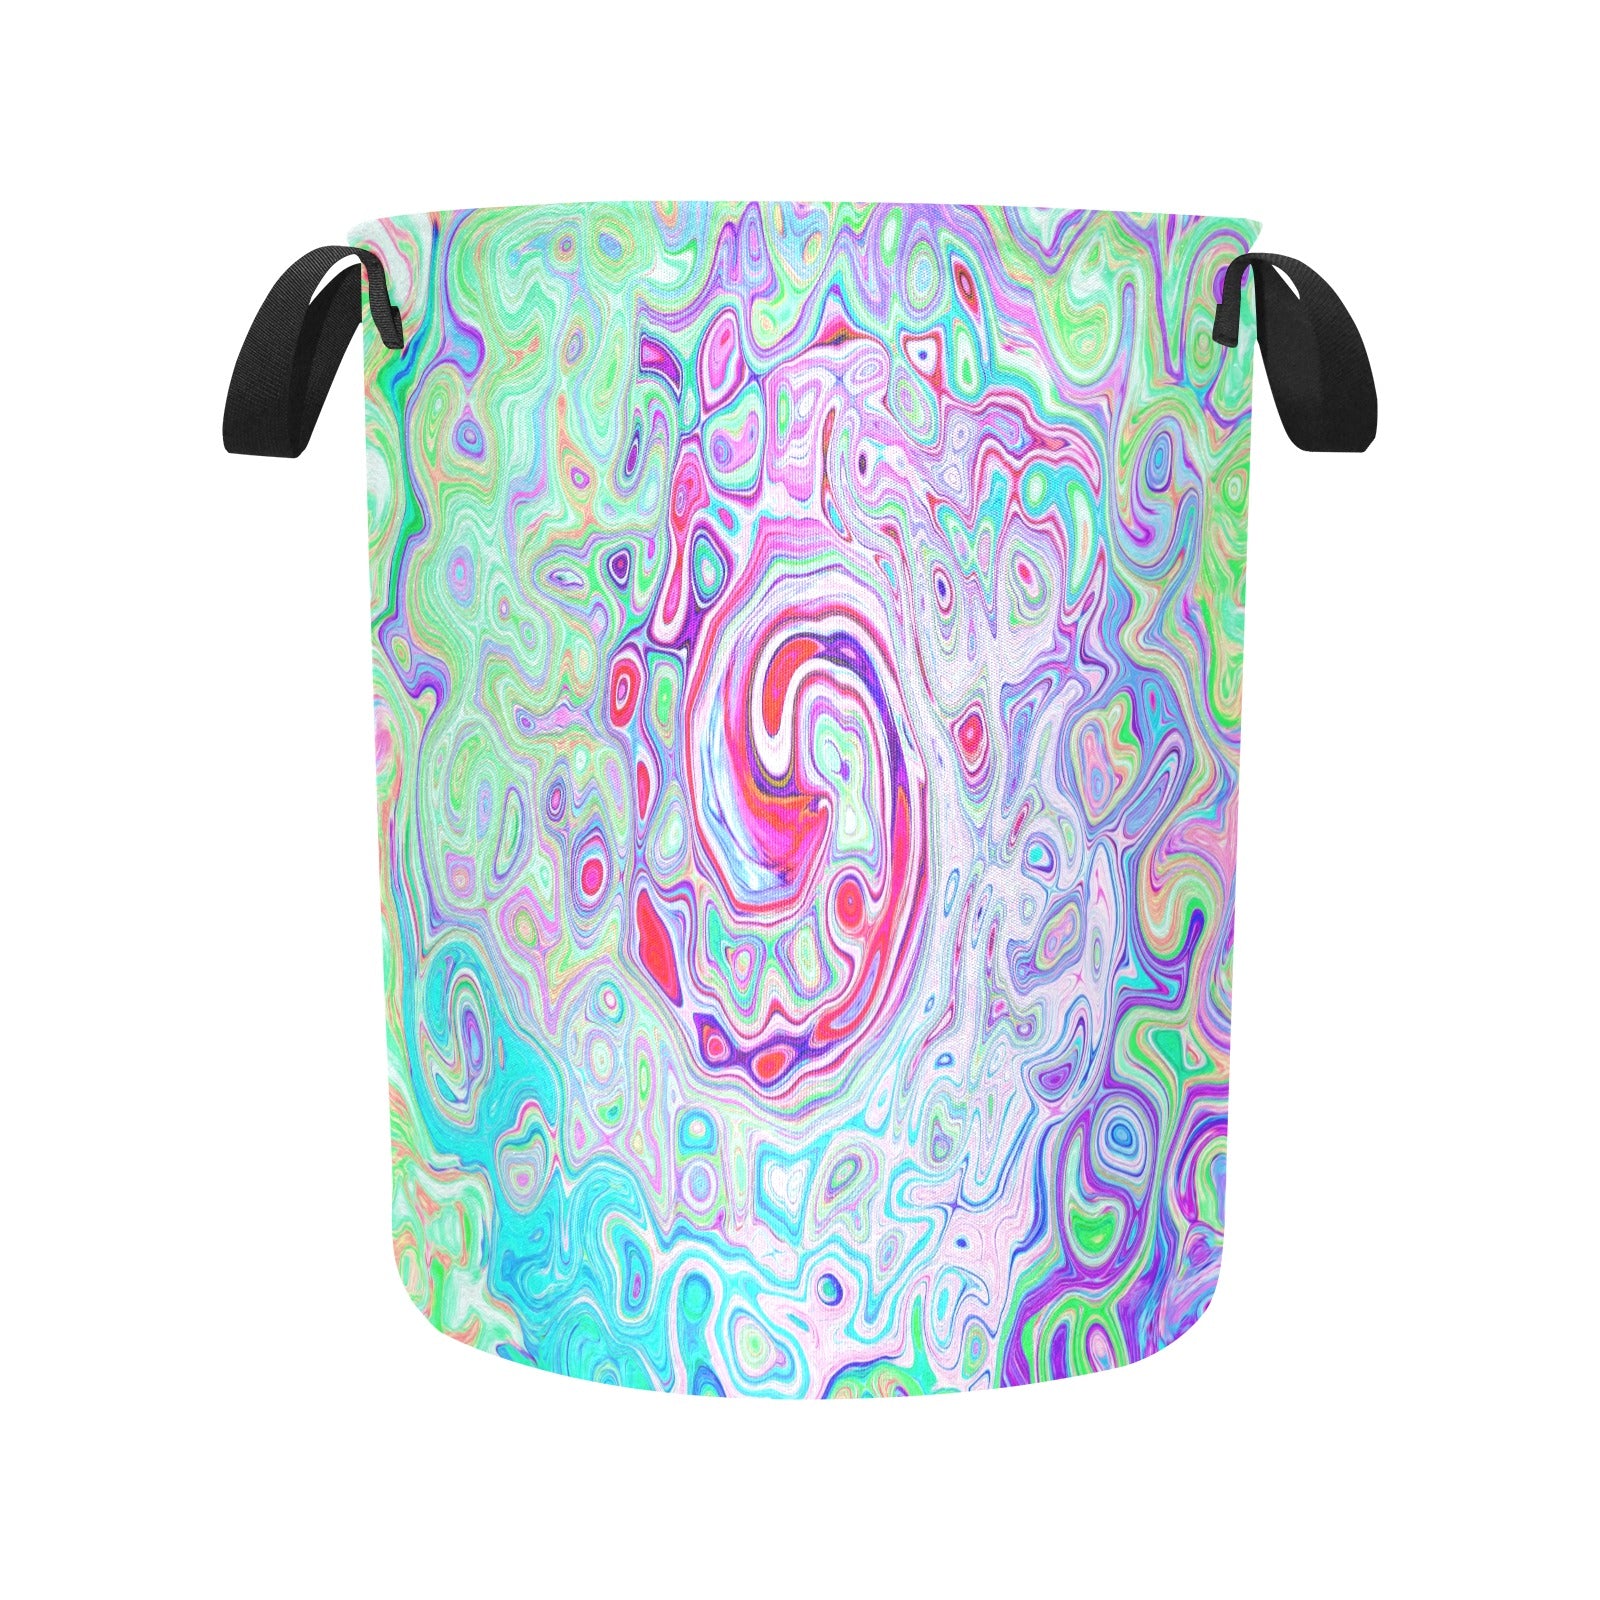 Fabric Laundry Basket with Handles, Groovy Abstract Retro Pink and Green Swirl